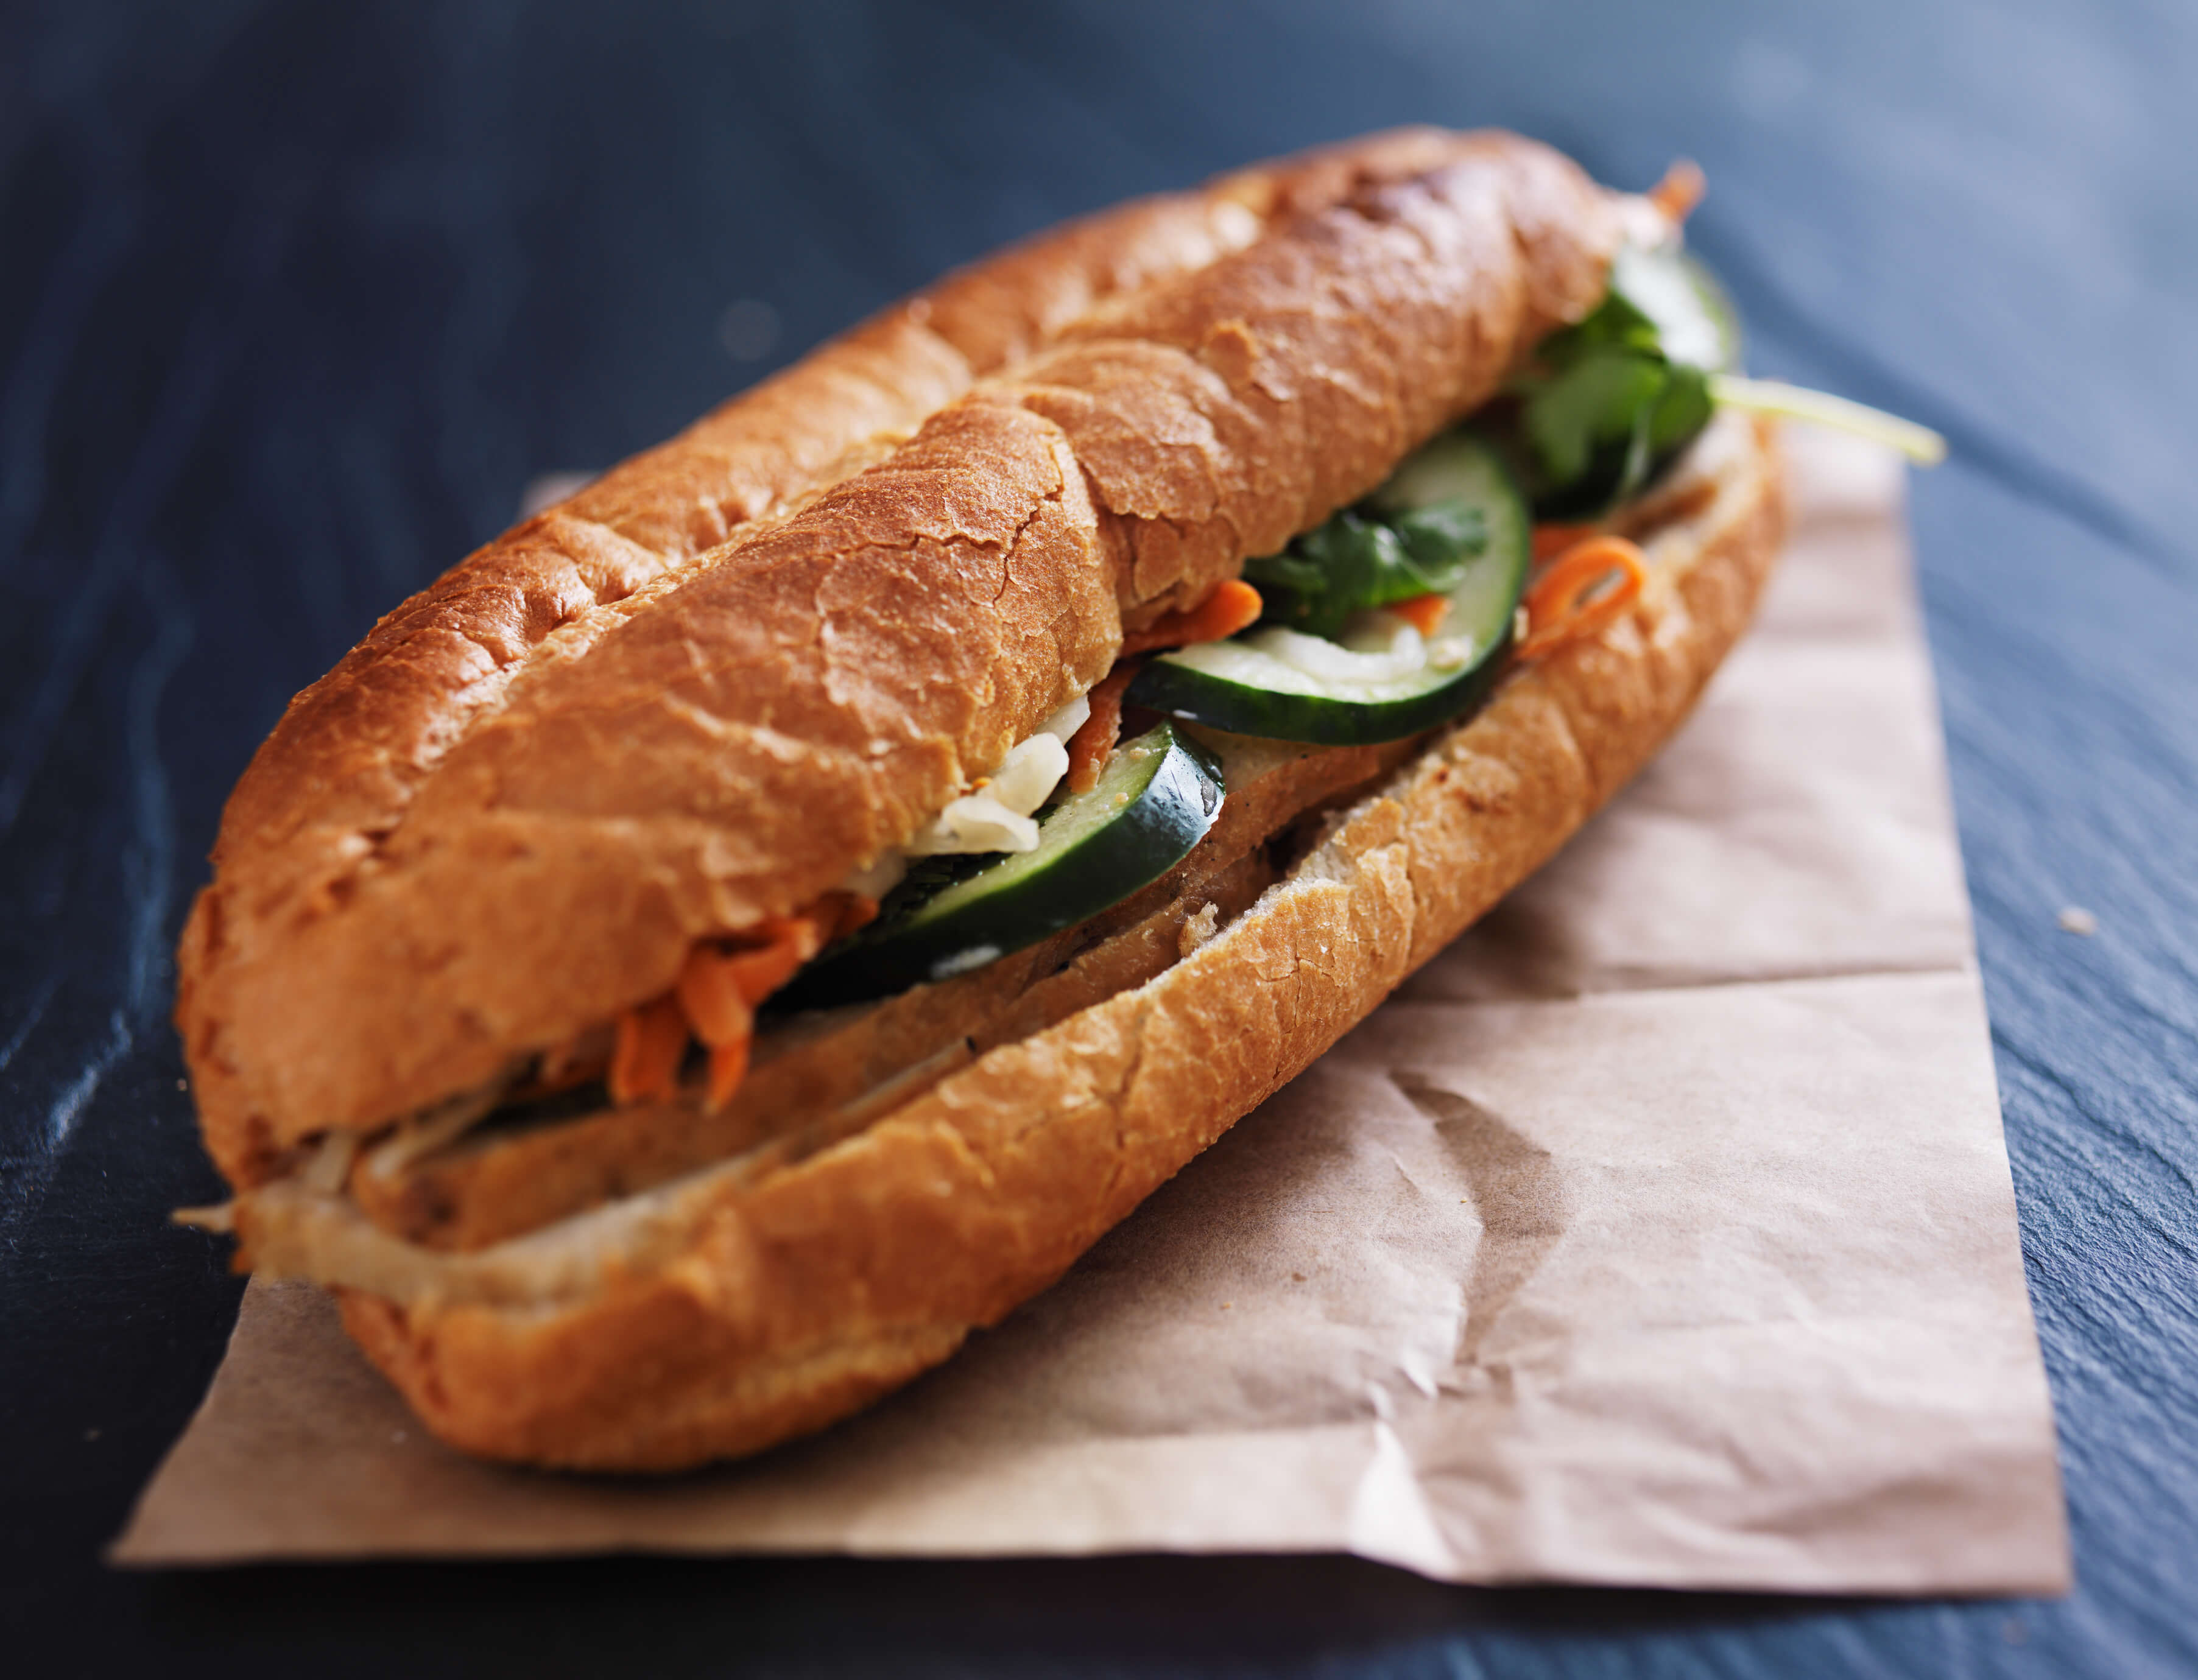 Making a banh mi sandwich is one way to try something different at lunch.